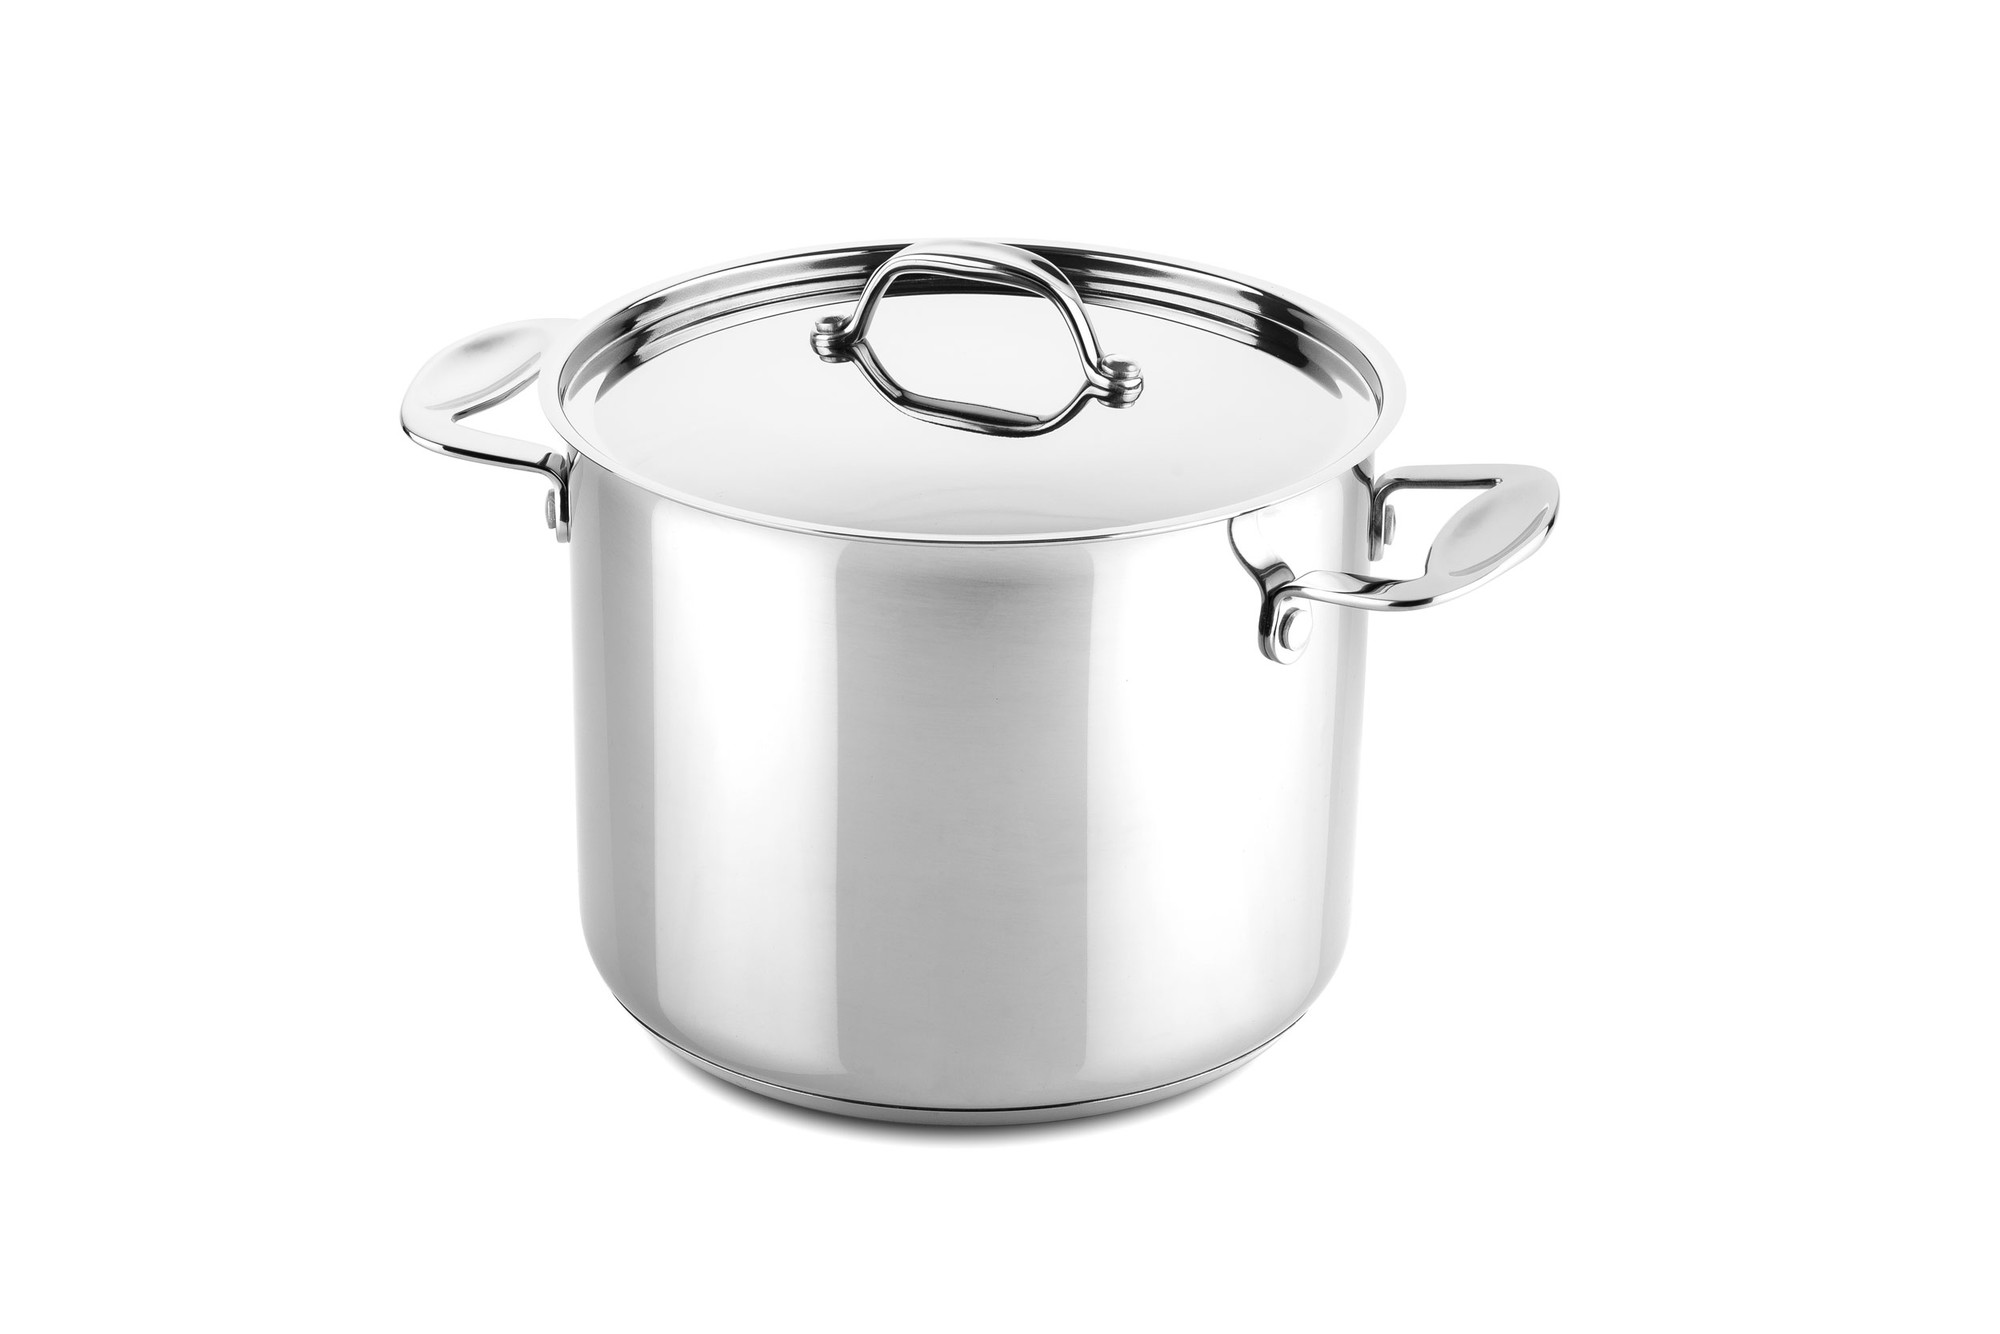 Deep pot 22 cm Glamour Stone Stainless Steel | 0700953288455